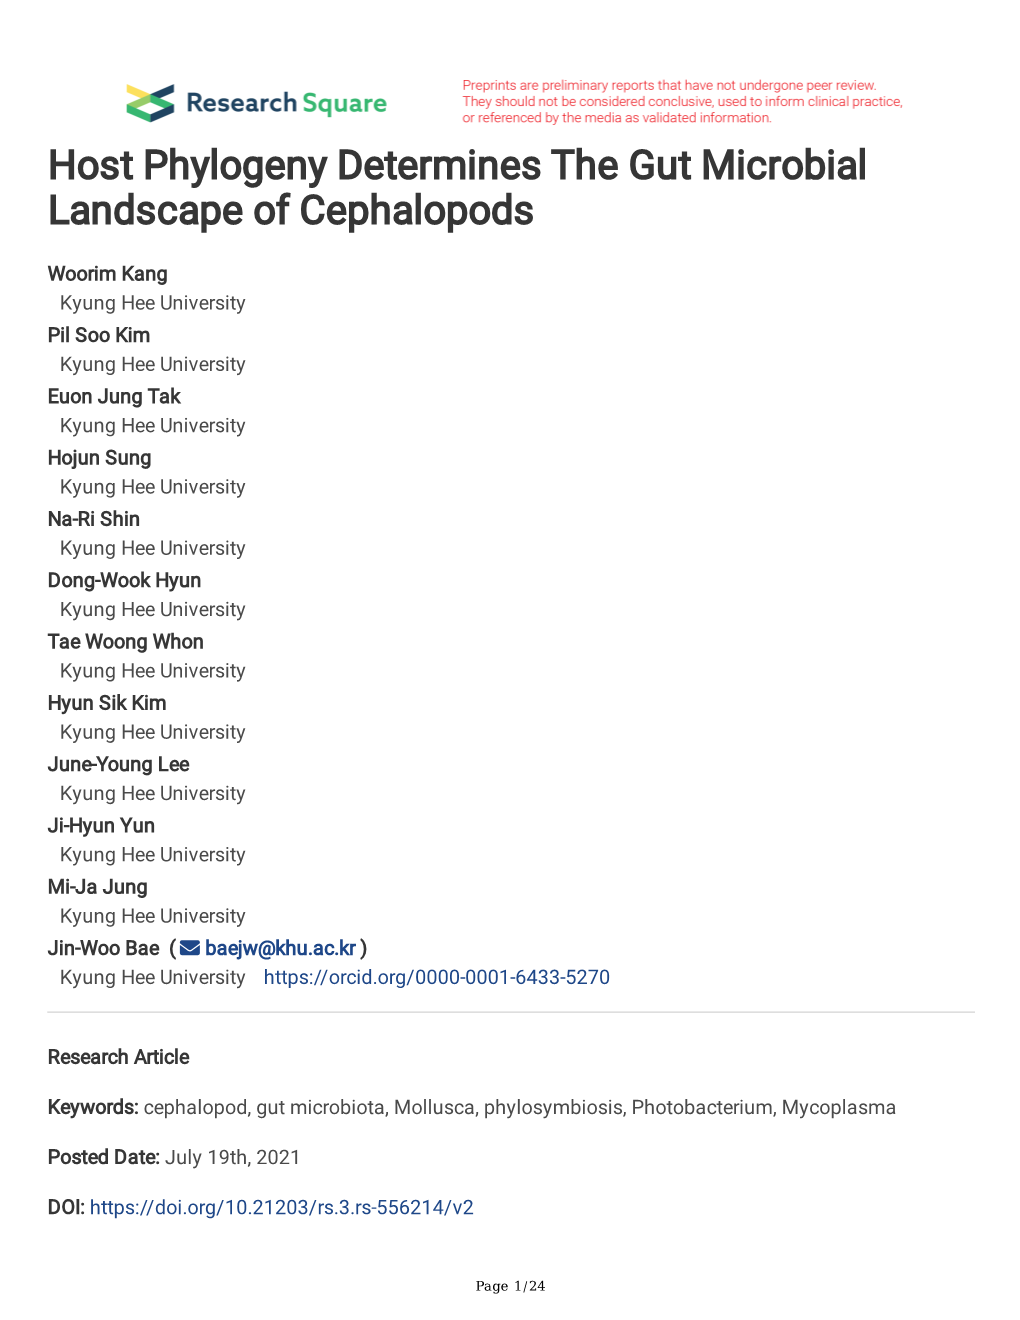 Host Phylogeny Determines the Gut Microbial Landscape of Cephalopods